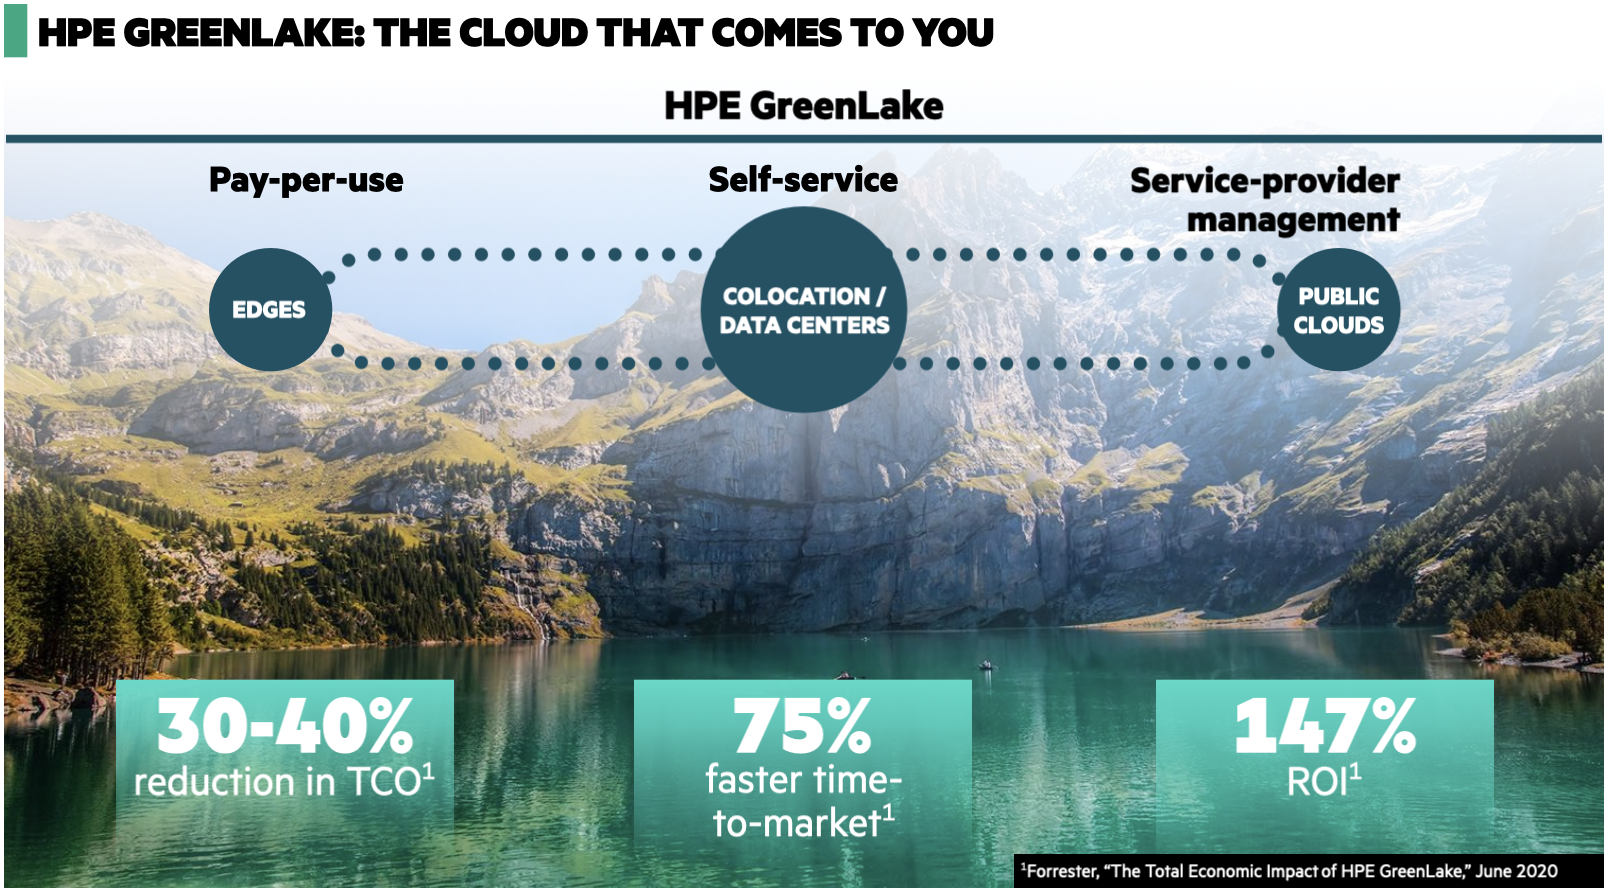 HPE GreenLake: The Cloud That Comes to You